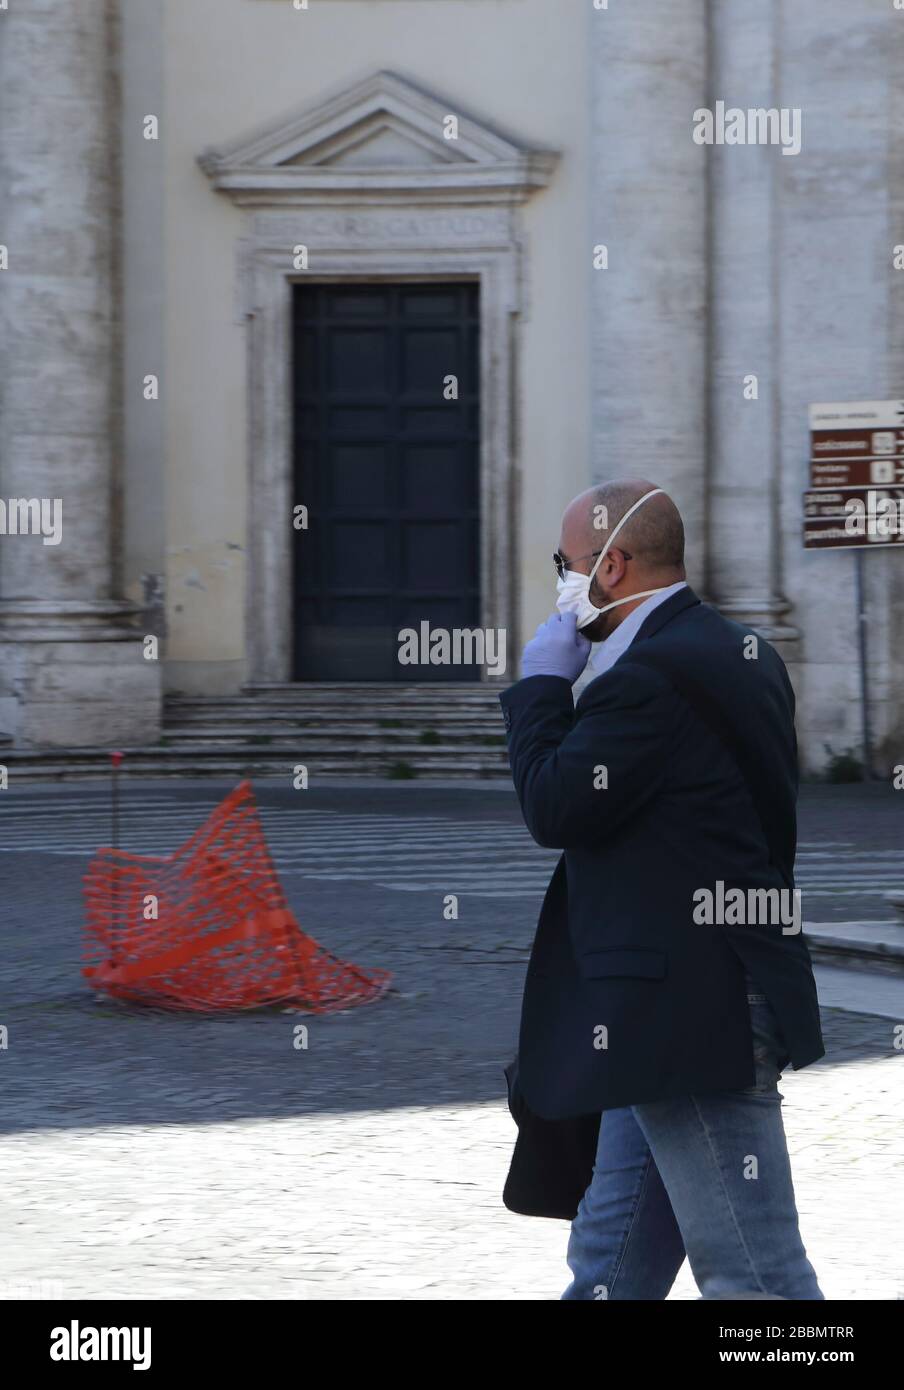 Rome, Italy. 1st April, 2020. The historical center of Rome is empty. Only police in the street. Very few people in the streets, shops, bars and restaurants are closed due the covid19 pandemic. Credit: Evandro Inetti/ZUMA Wire/Alamy Live News Stock Photo